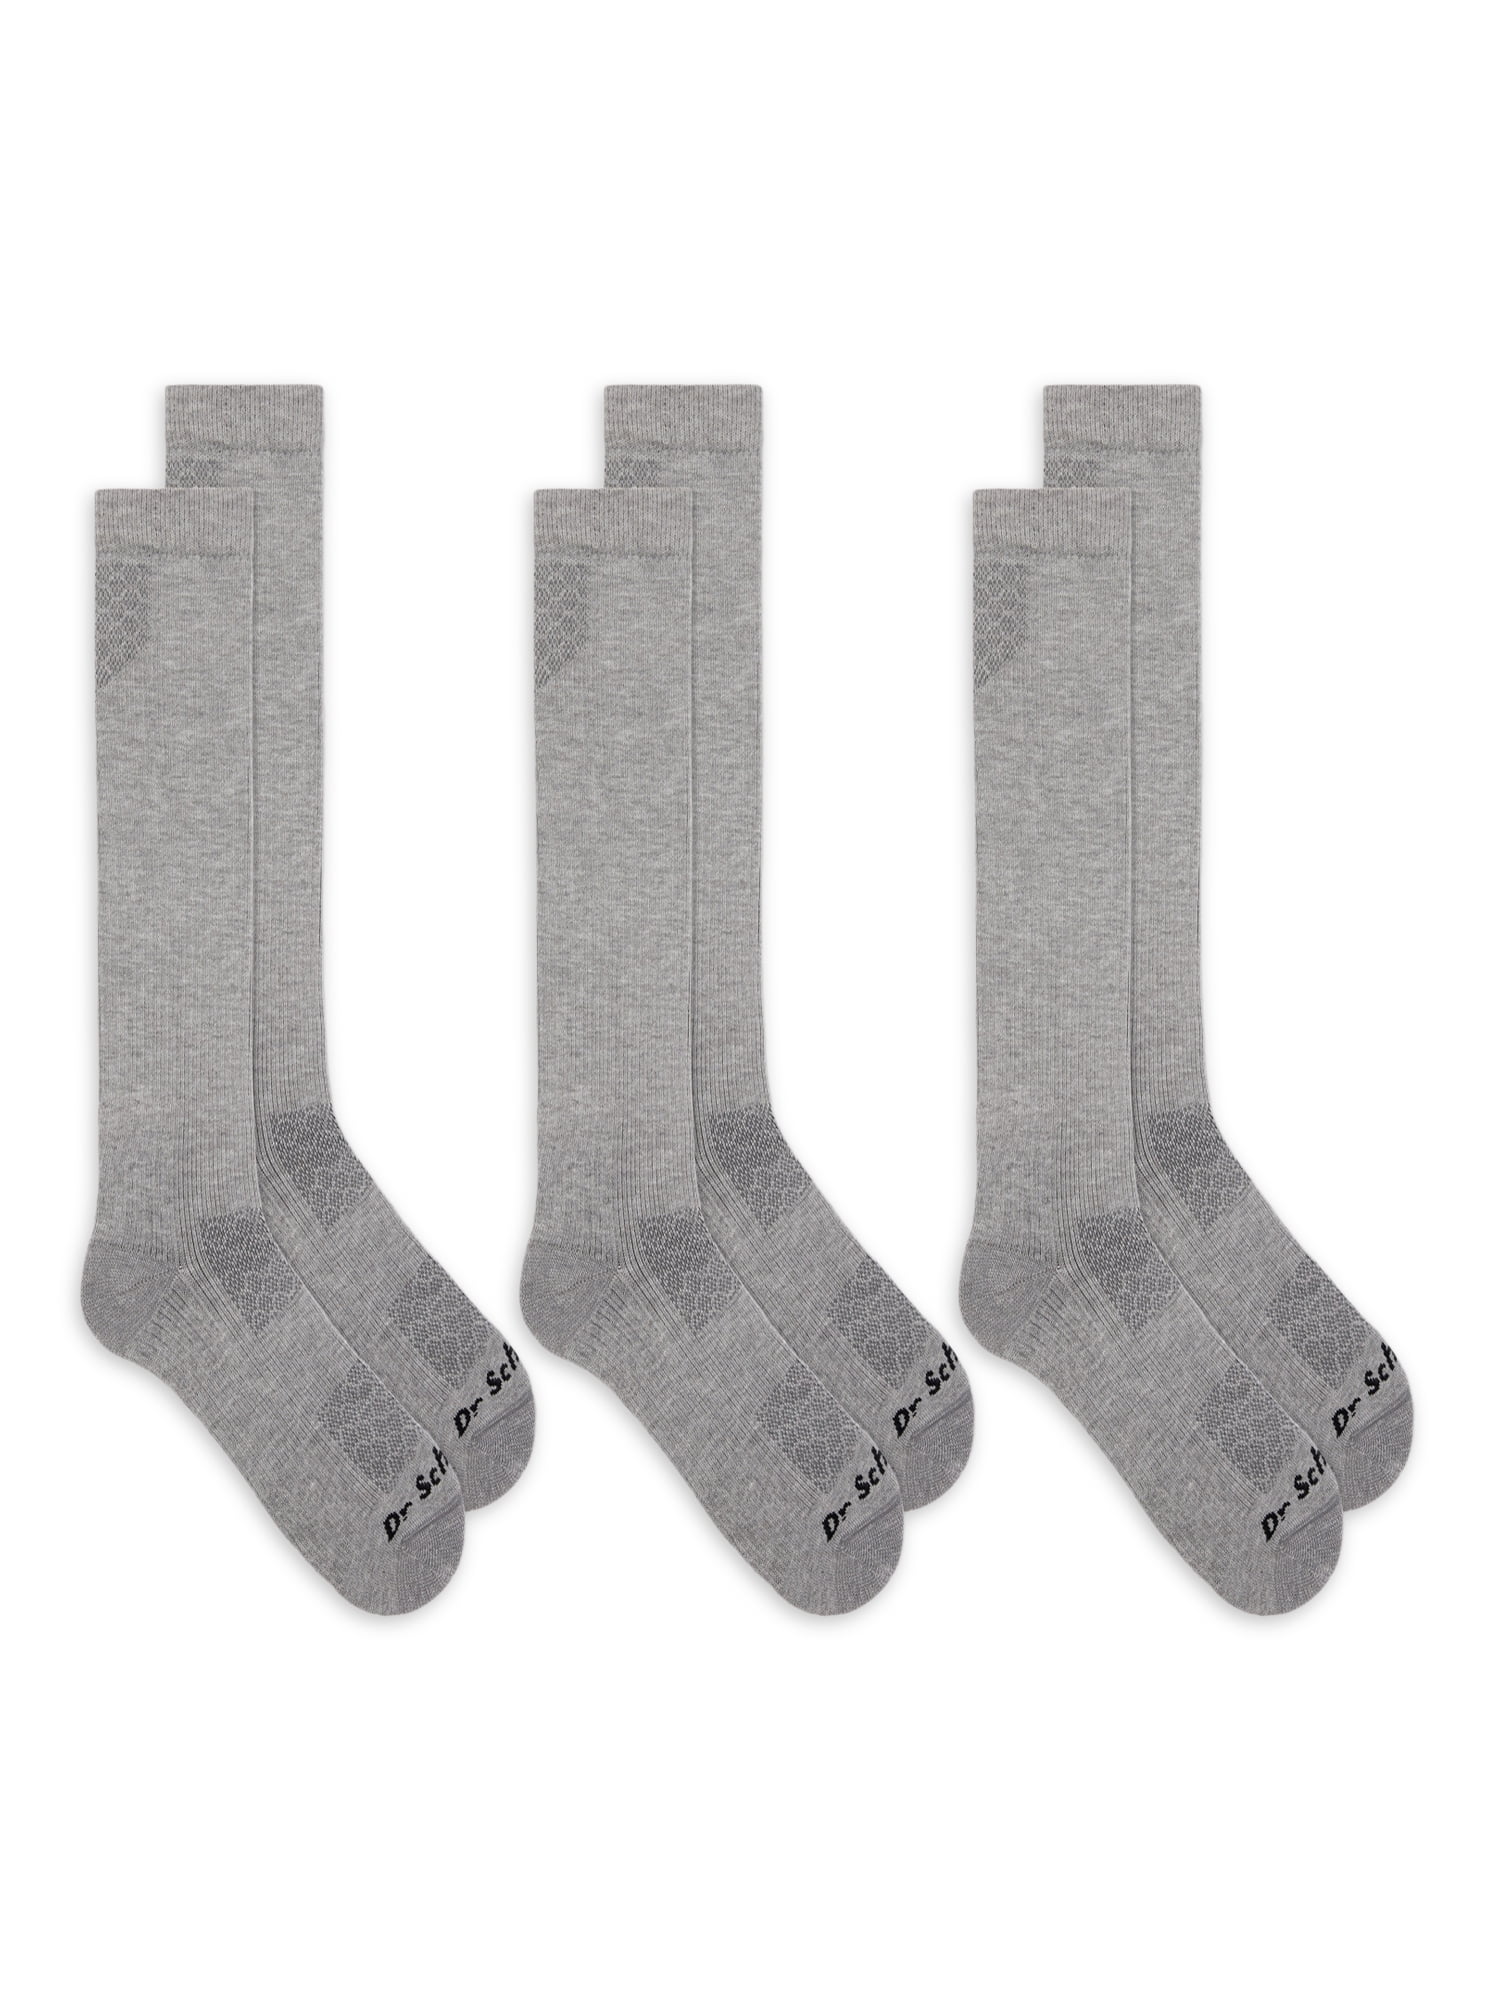 Dr. Scholl's Men's Graduated Compression Over the Calf Socks - 2 & 3 Pair  Packs - Energizing Comfort and Fatigue Relief 2 Charcoal Heather 7-12